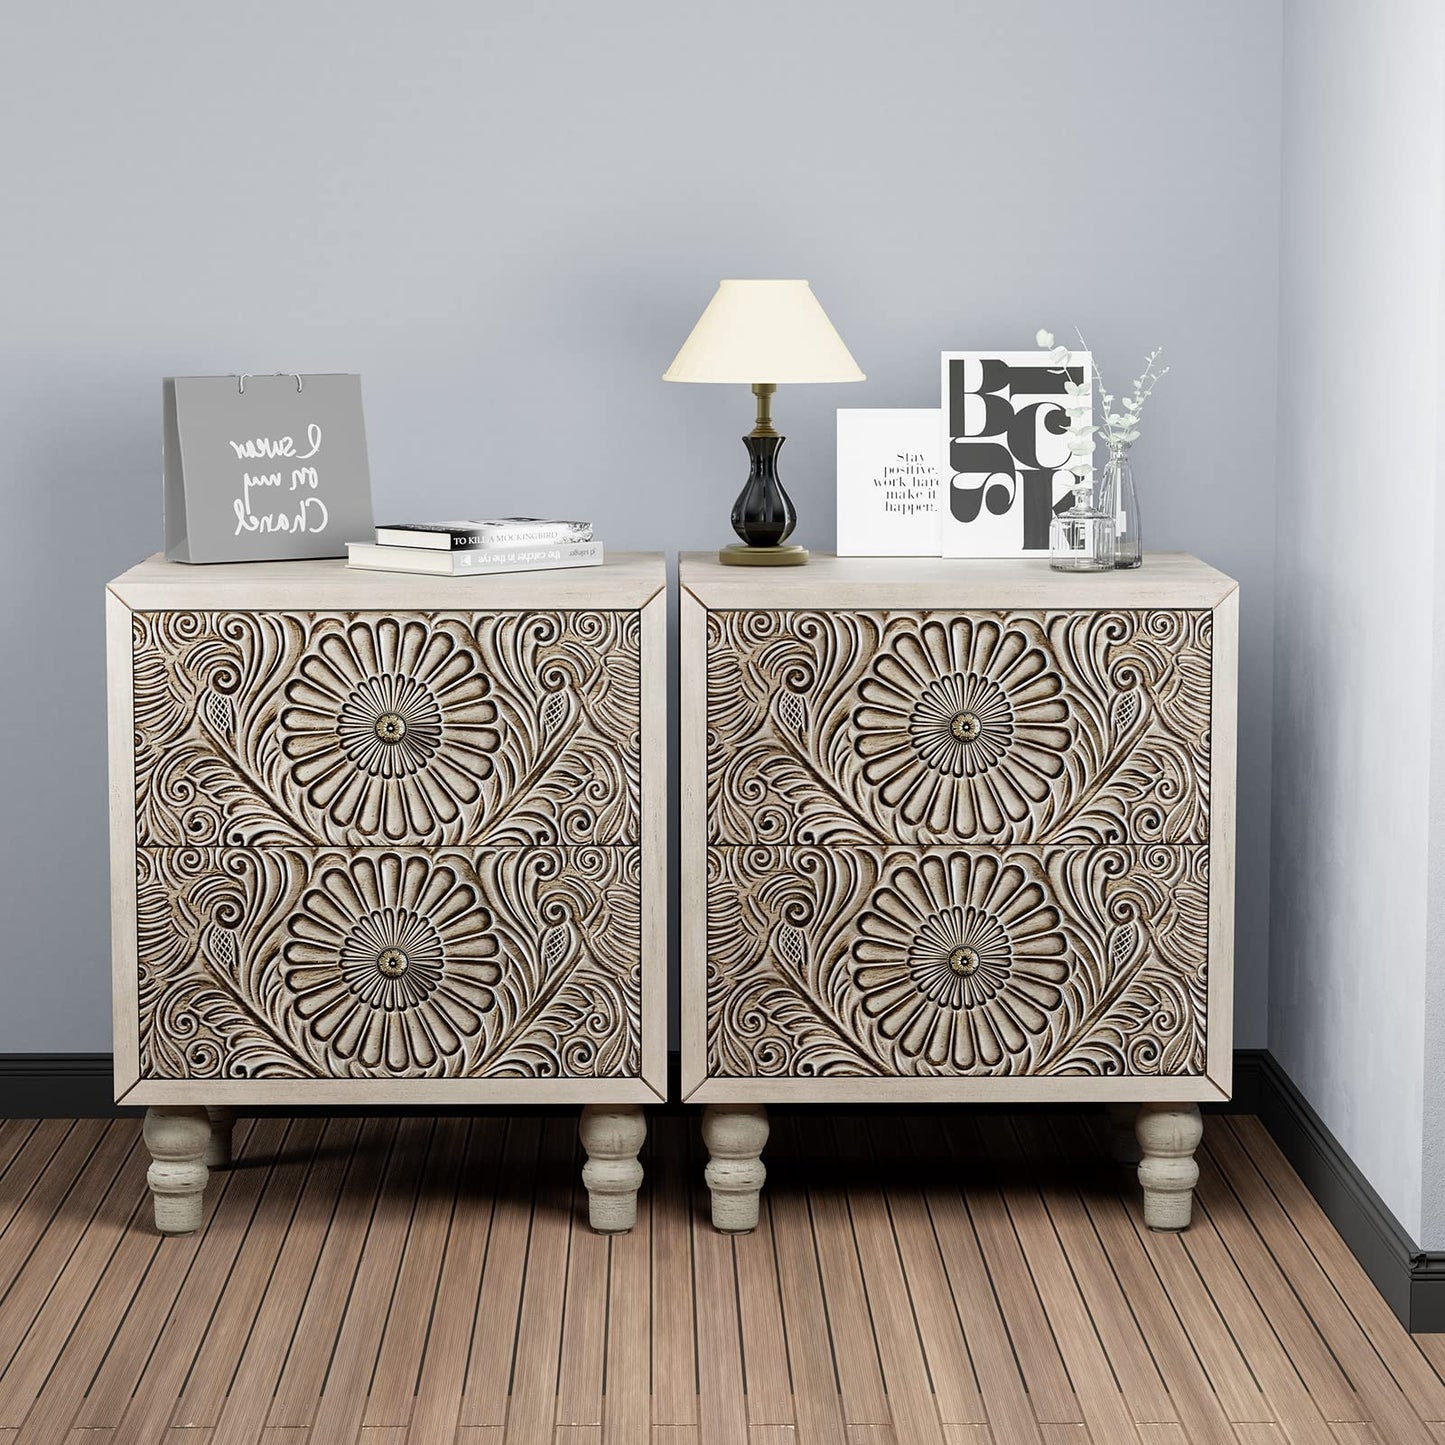 HOMPUS End Table with 2 Drawers Sets of 2, 2 Tier Bedside Table Sets, Wood Grain Nightstand, Small Accent Table with Pattern Drawer, Side Table for